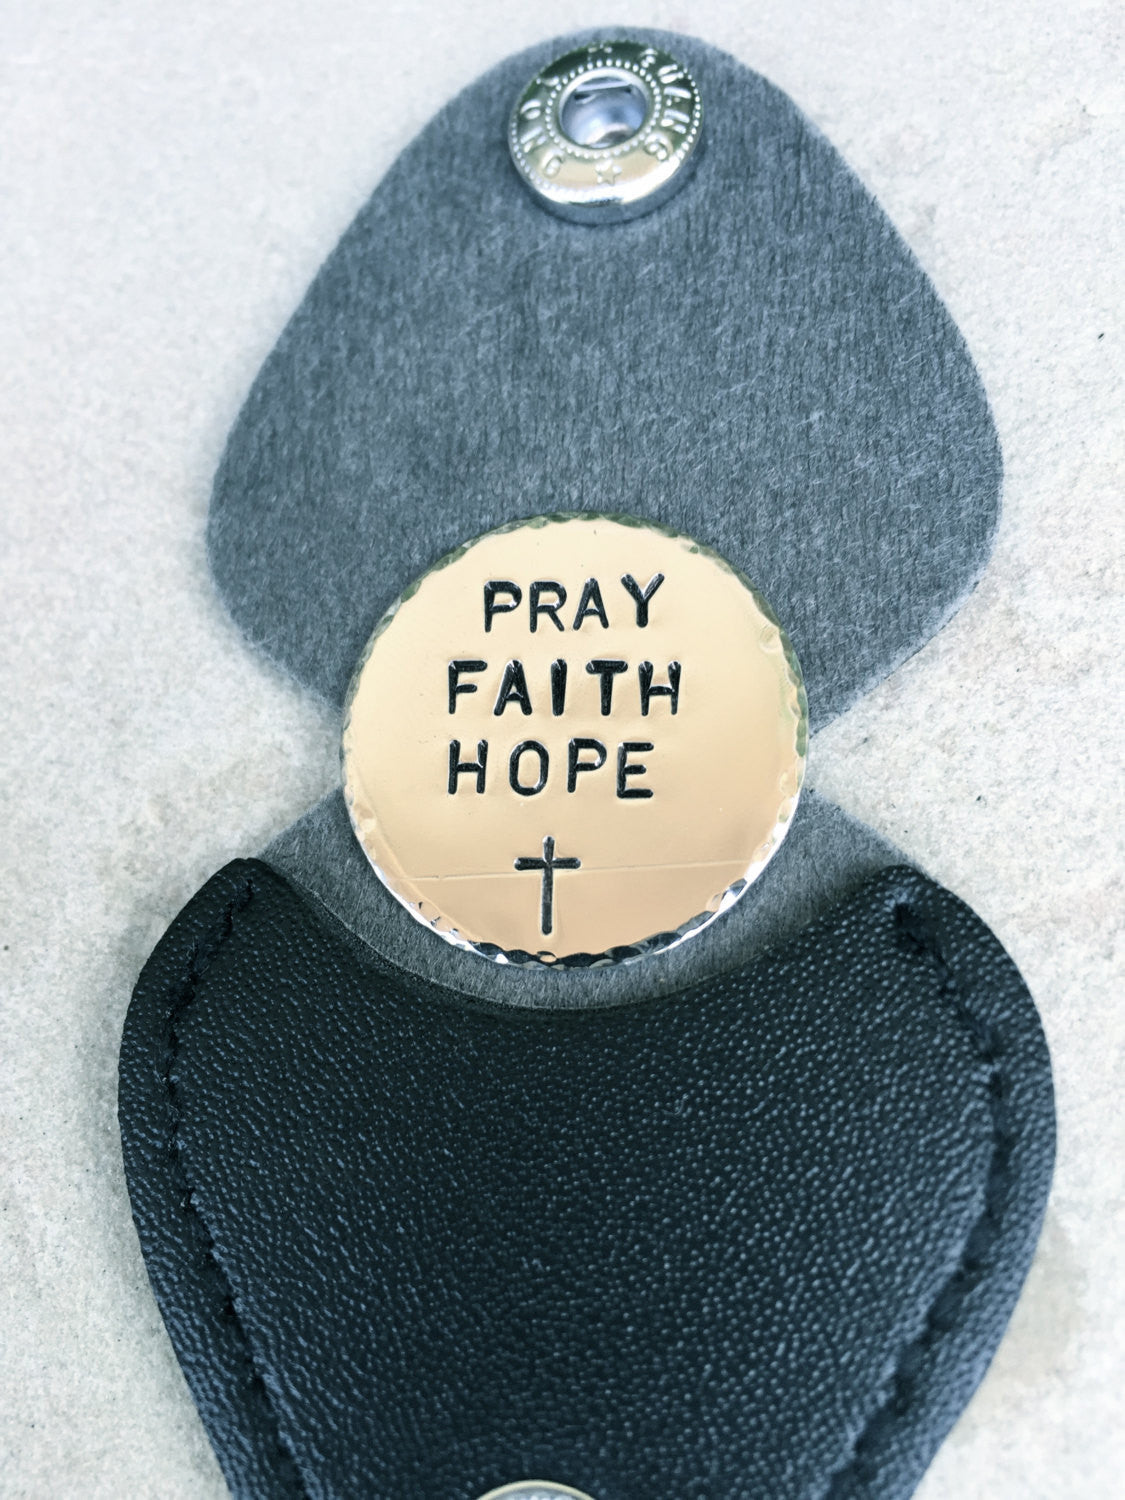 Prayer Keepsake, Father's Day, Husband Gifts, Prayer Keychain, Be Safe Come Home, One Day At A Time, Pray Faith Hope, natashaaloha - Natashaaloha, jewelry, bracelets, necklace, keychains, fishing lures, gifts for men, charms, personalized, 